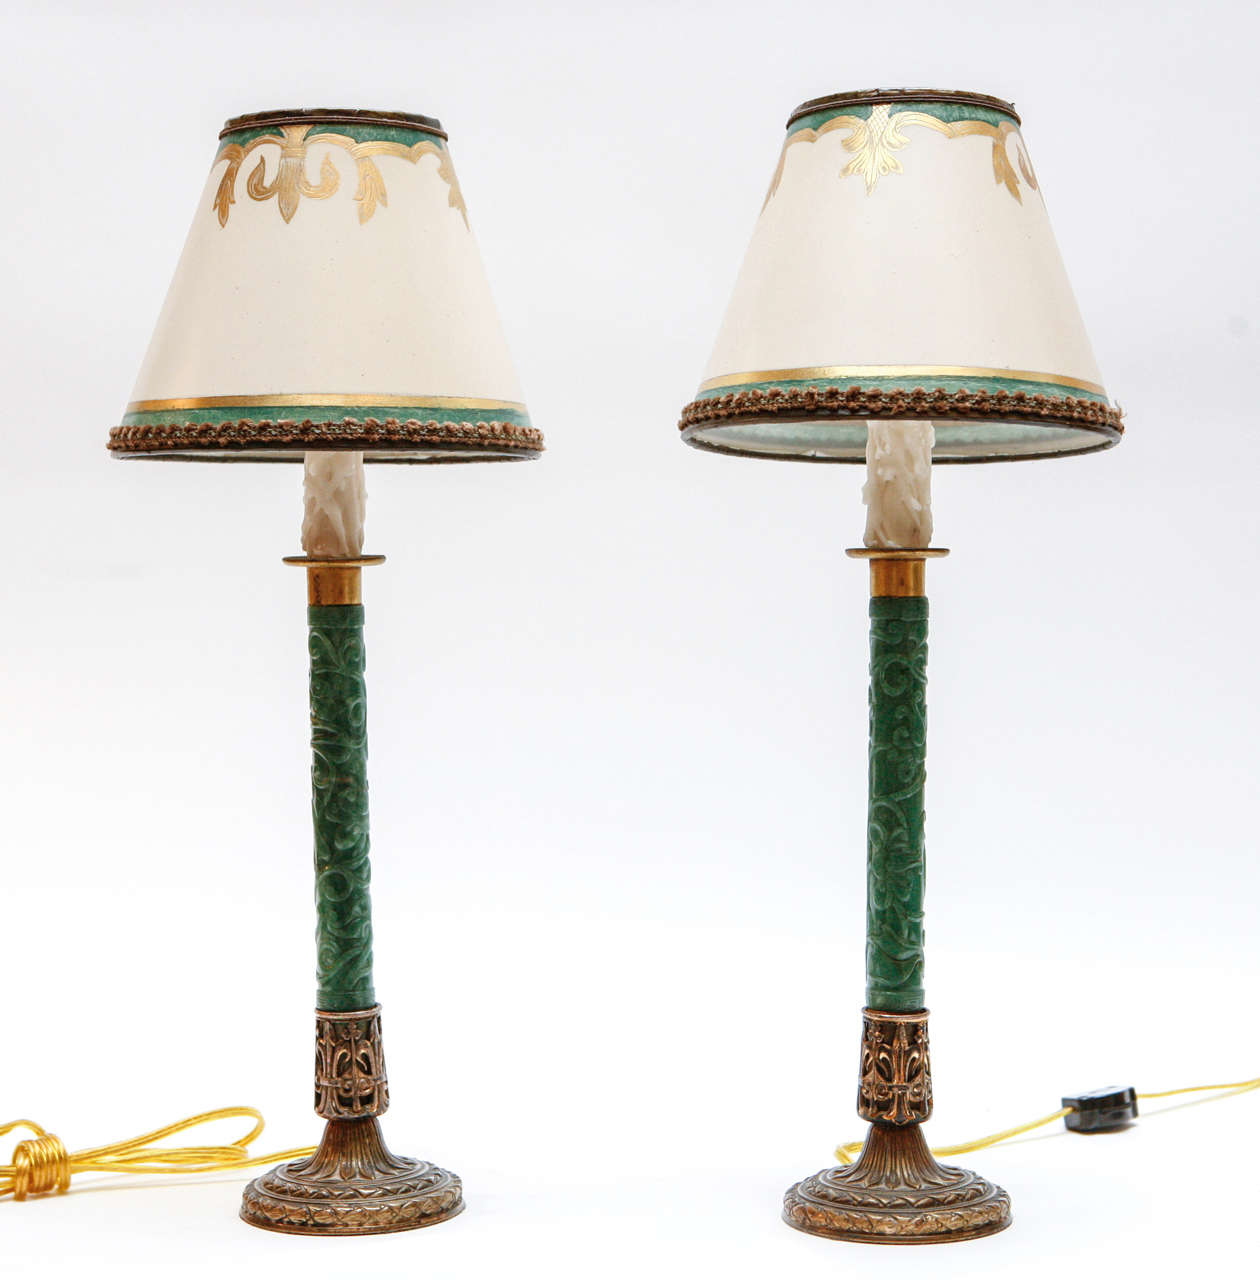 Late 19th c. French Green Nephrite Candlesticks converted to lamps.  They are French Bronze Mounted and finely carved. The Shades are included and are Hand Made of Parchment Paper. They are Hand Gilded and Decorated. The lamps have been newly wired.